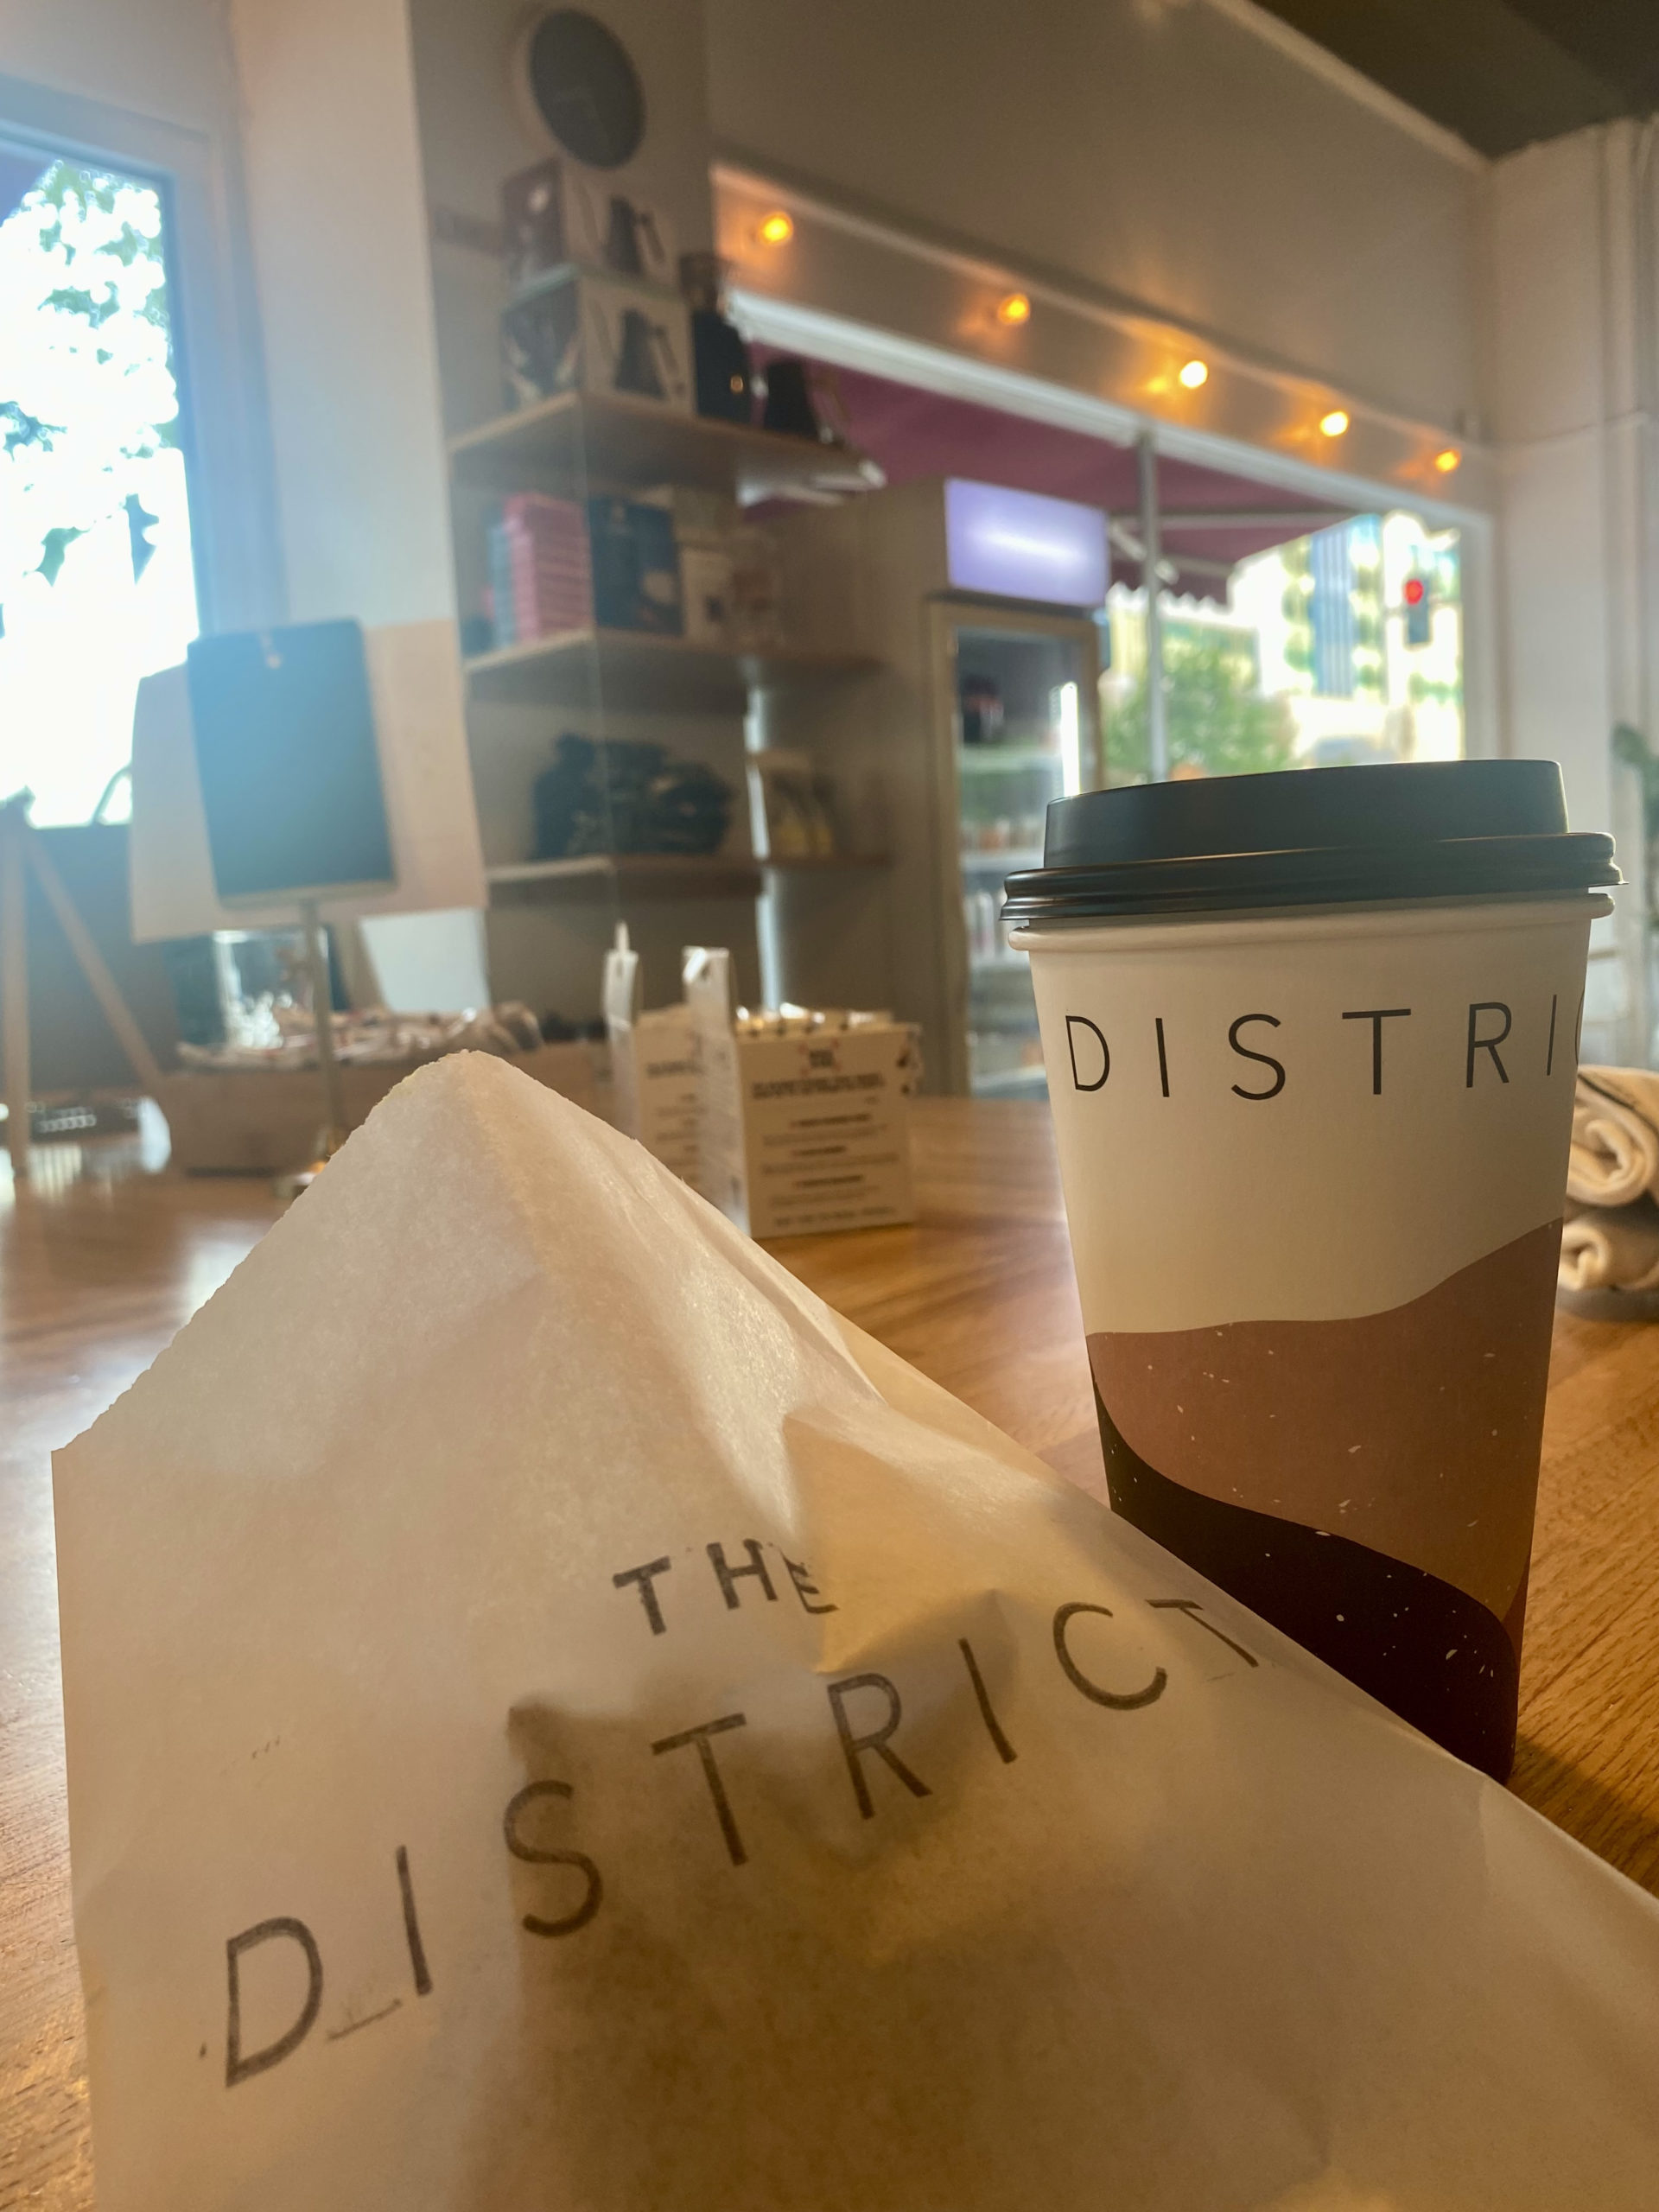 Idaho's Most Beautiful Coffee Shop: The District (219 N 10th St, Boise)